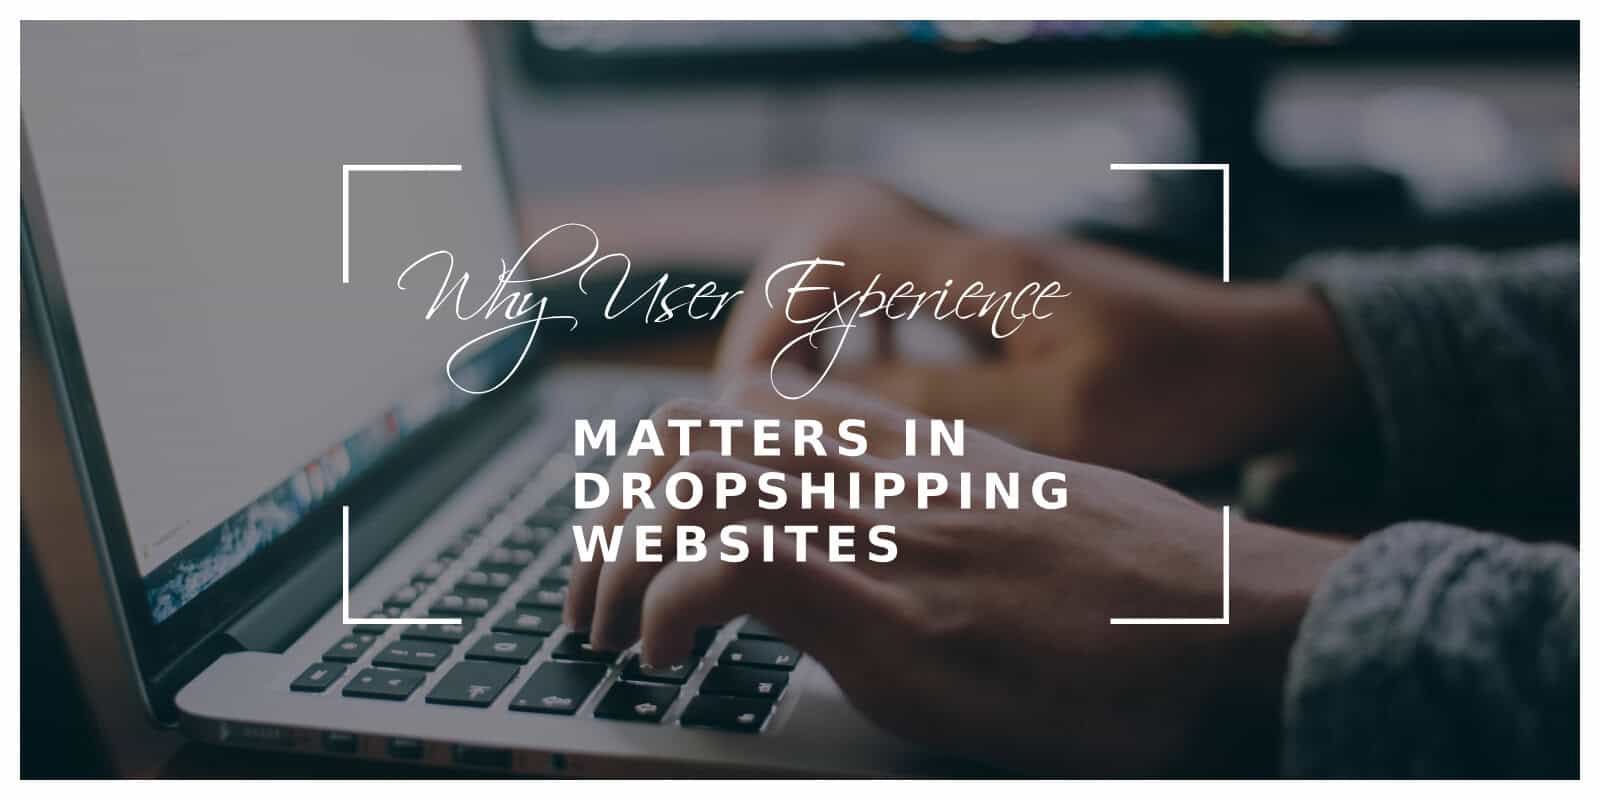 Why User Experience Matters in Dropshipping Websites